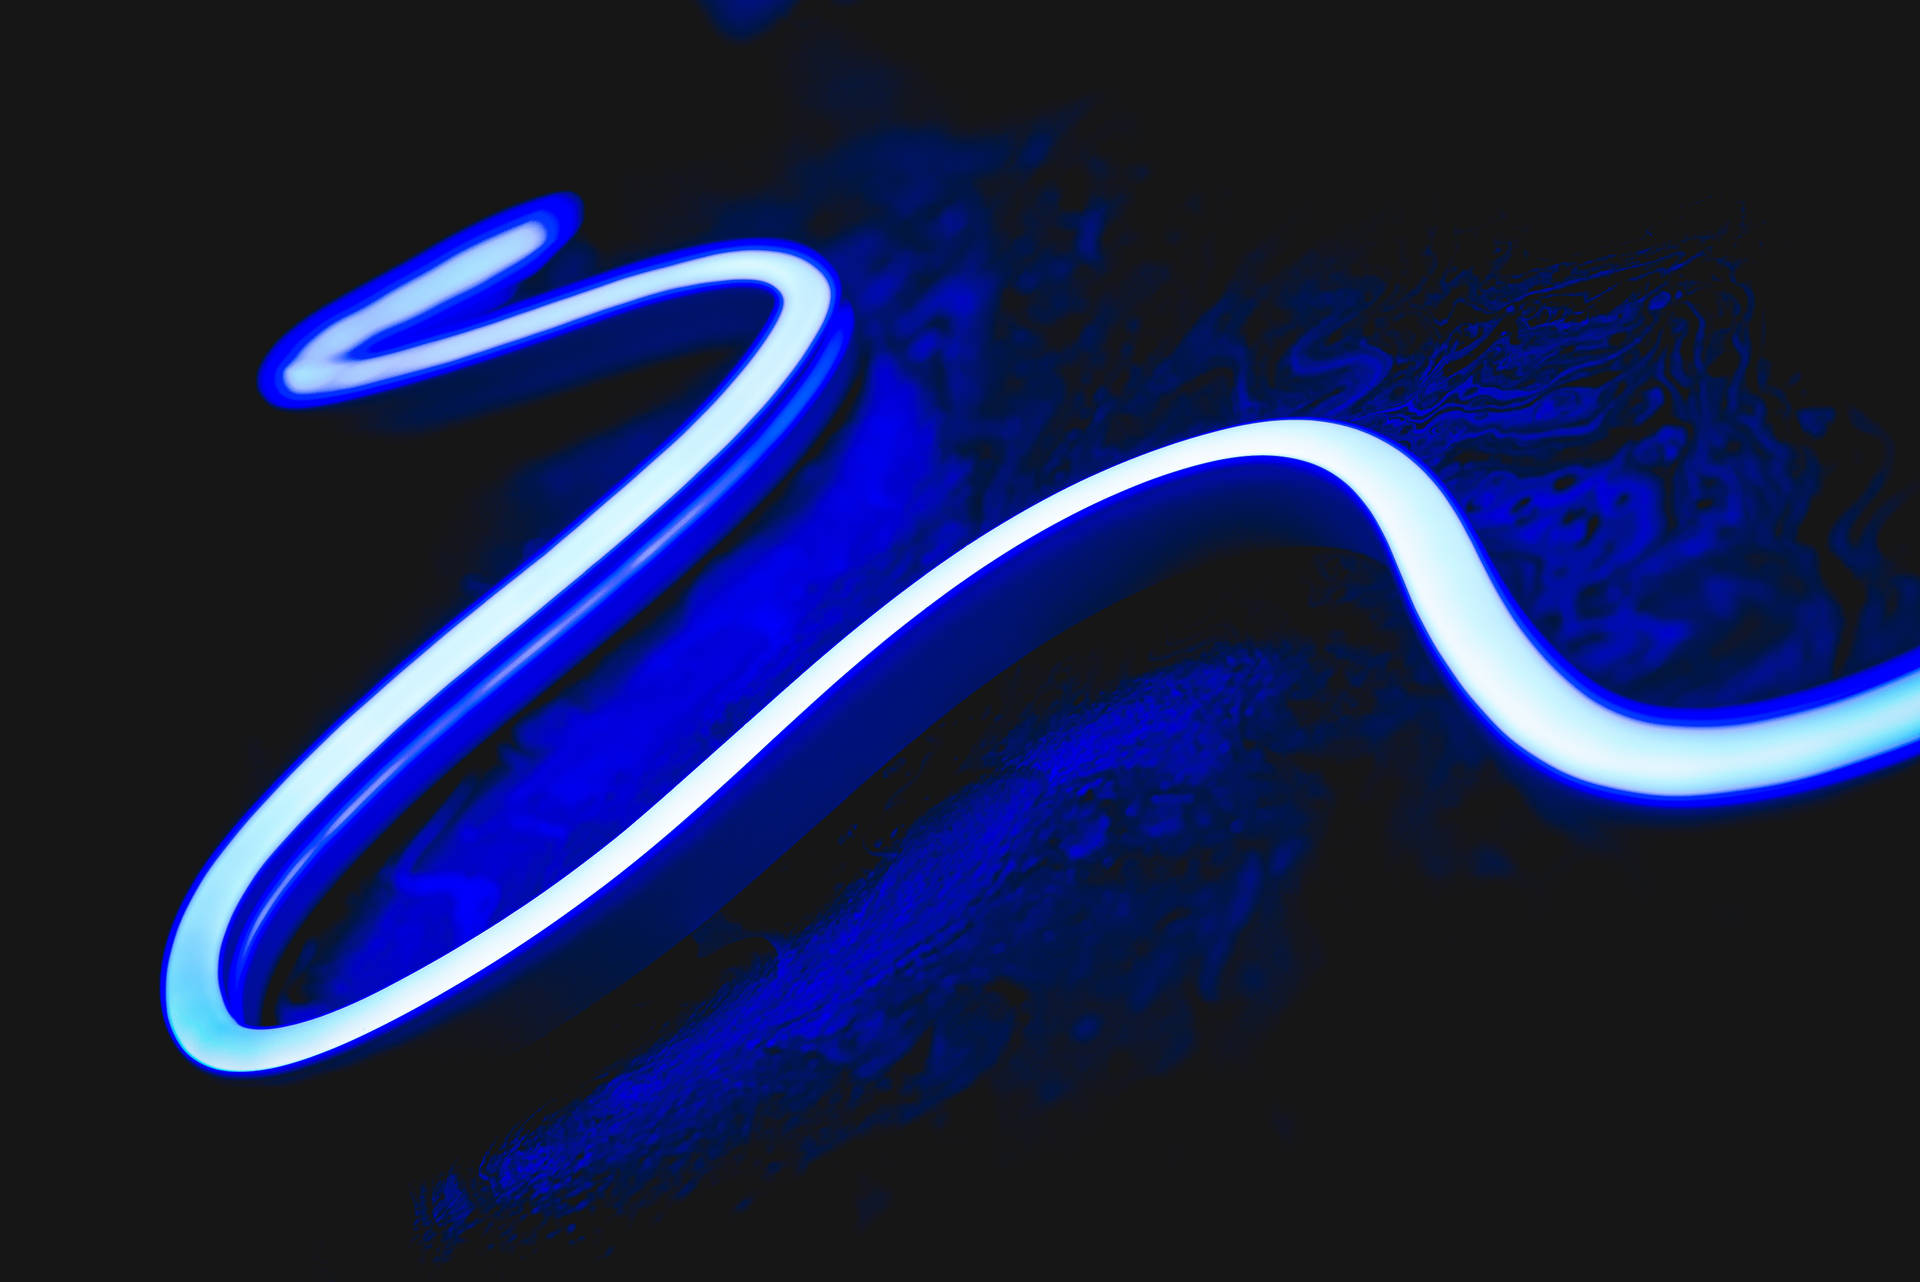 6016X4016 Neon Lights Wallpaper and Background